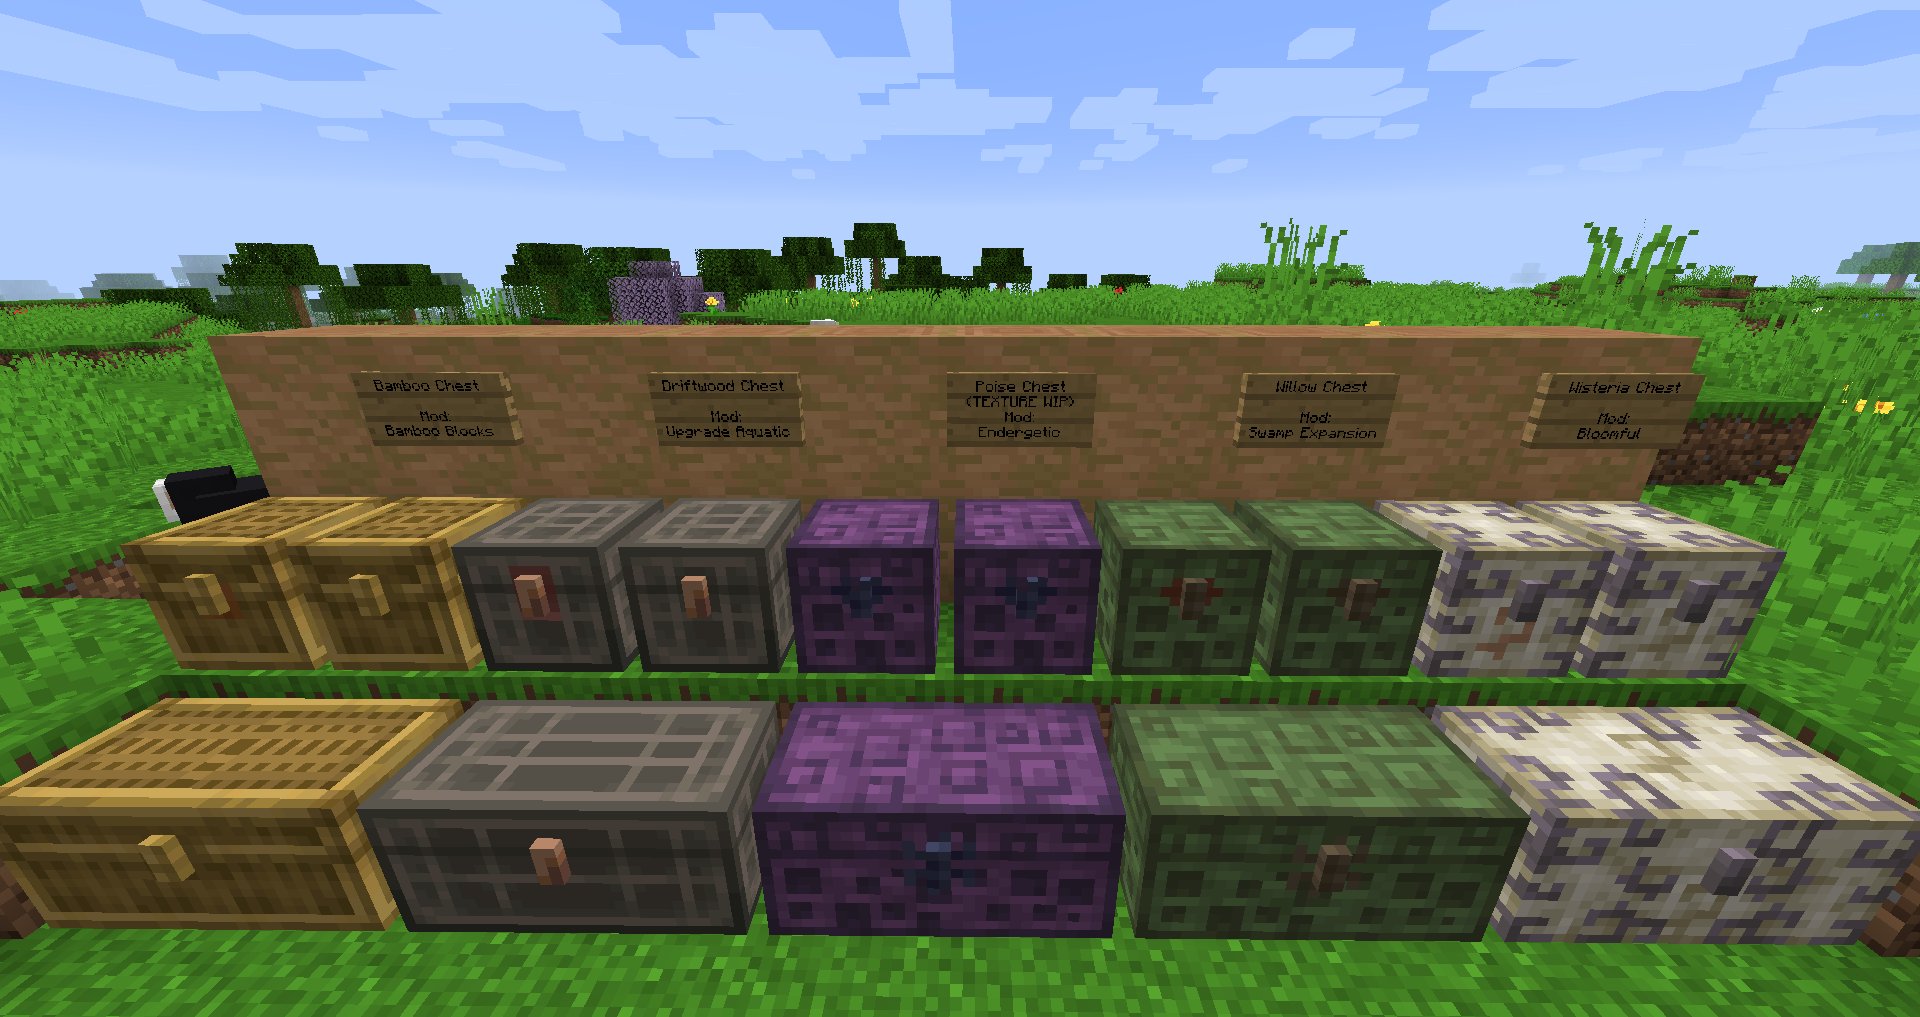 Vazkii S Mods Improved Quark Feature Variant Chests Now Has Built In Compatibility With Some Popular Vanilla Mods That Add New Wood Types Credit To The Individual Mod Authors Who Provided The